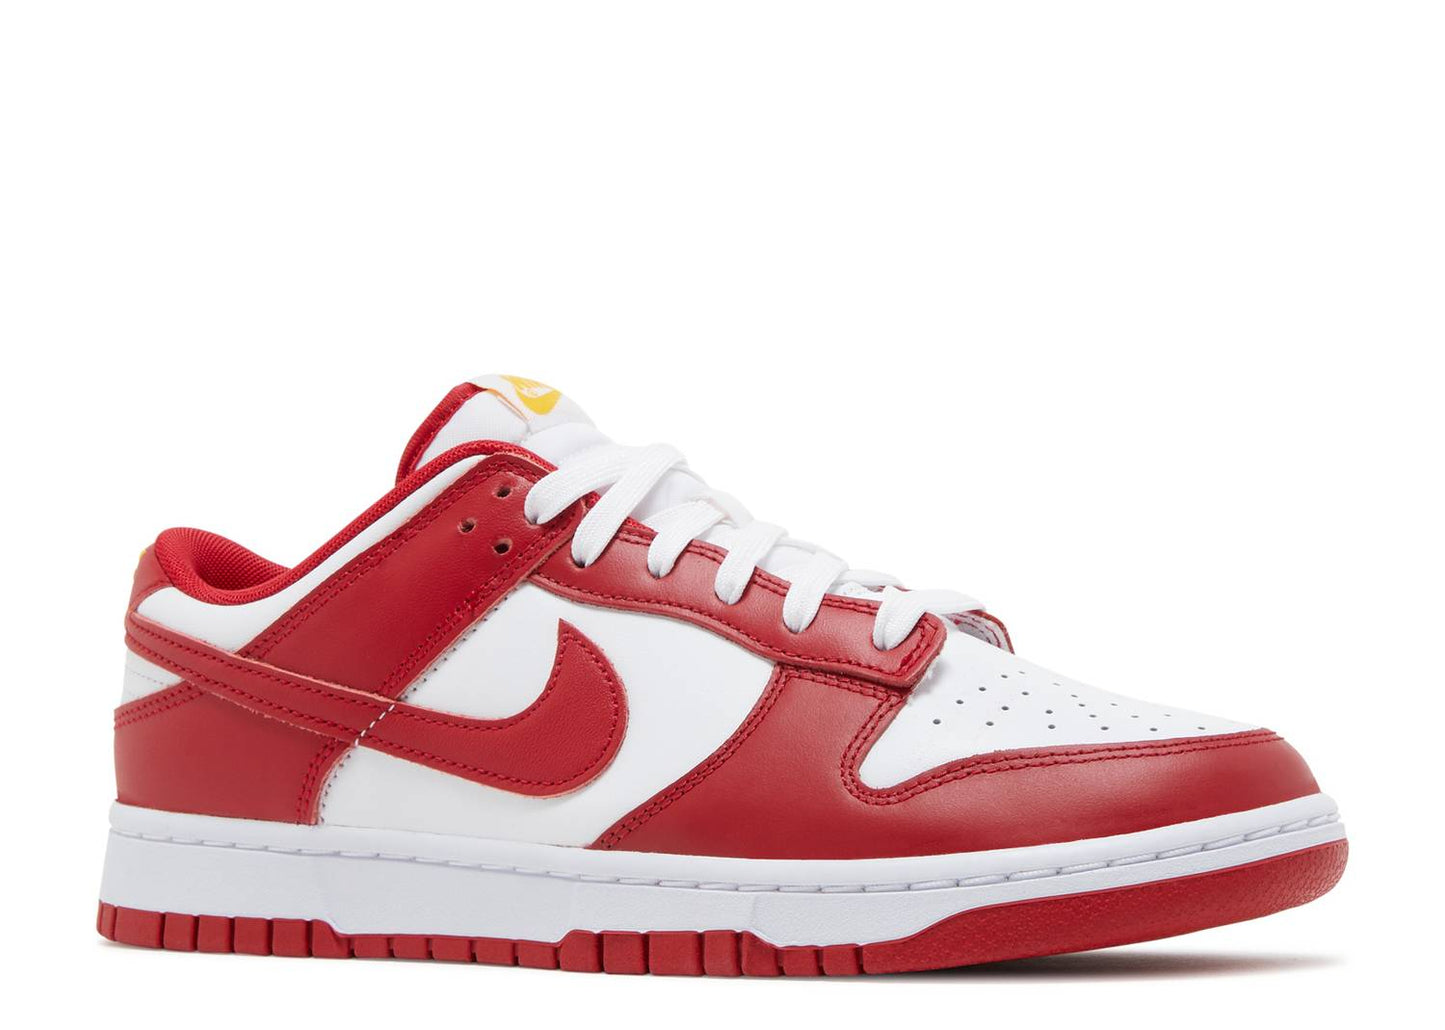 NIKE DUNK LOW 'GYM RED' USC